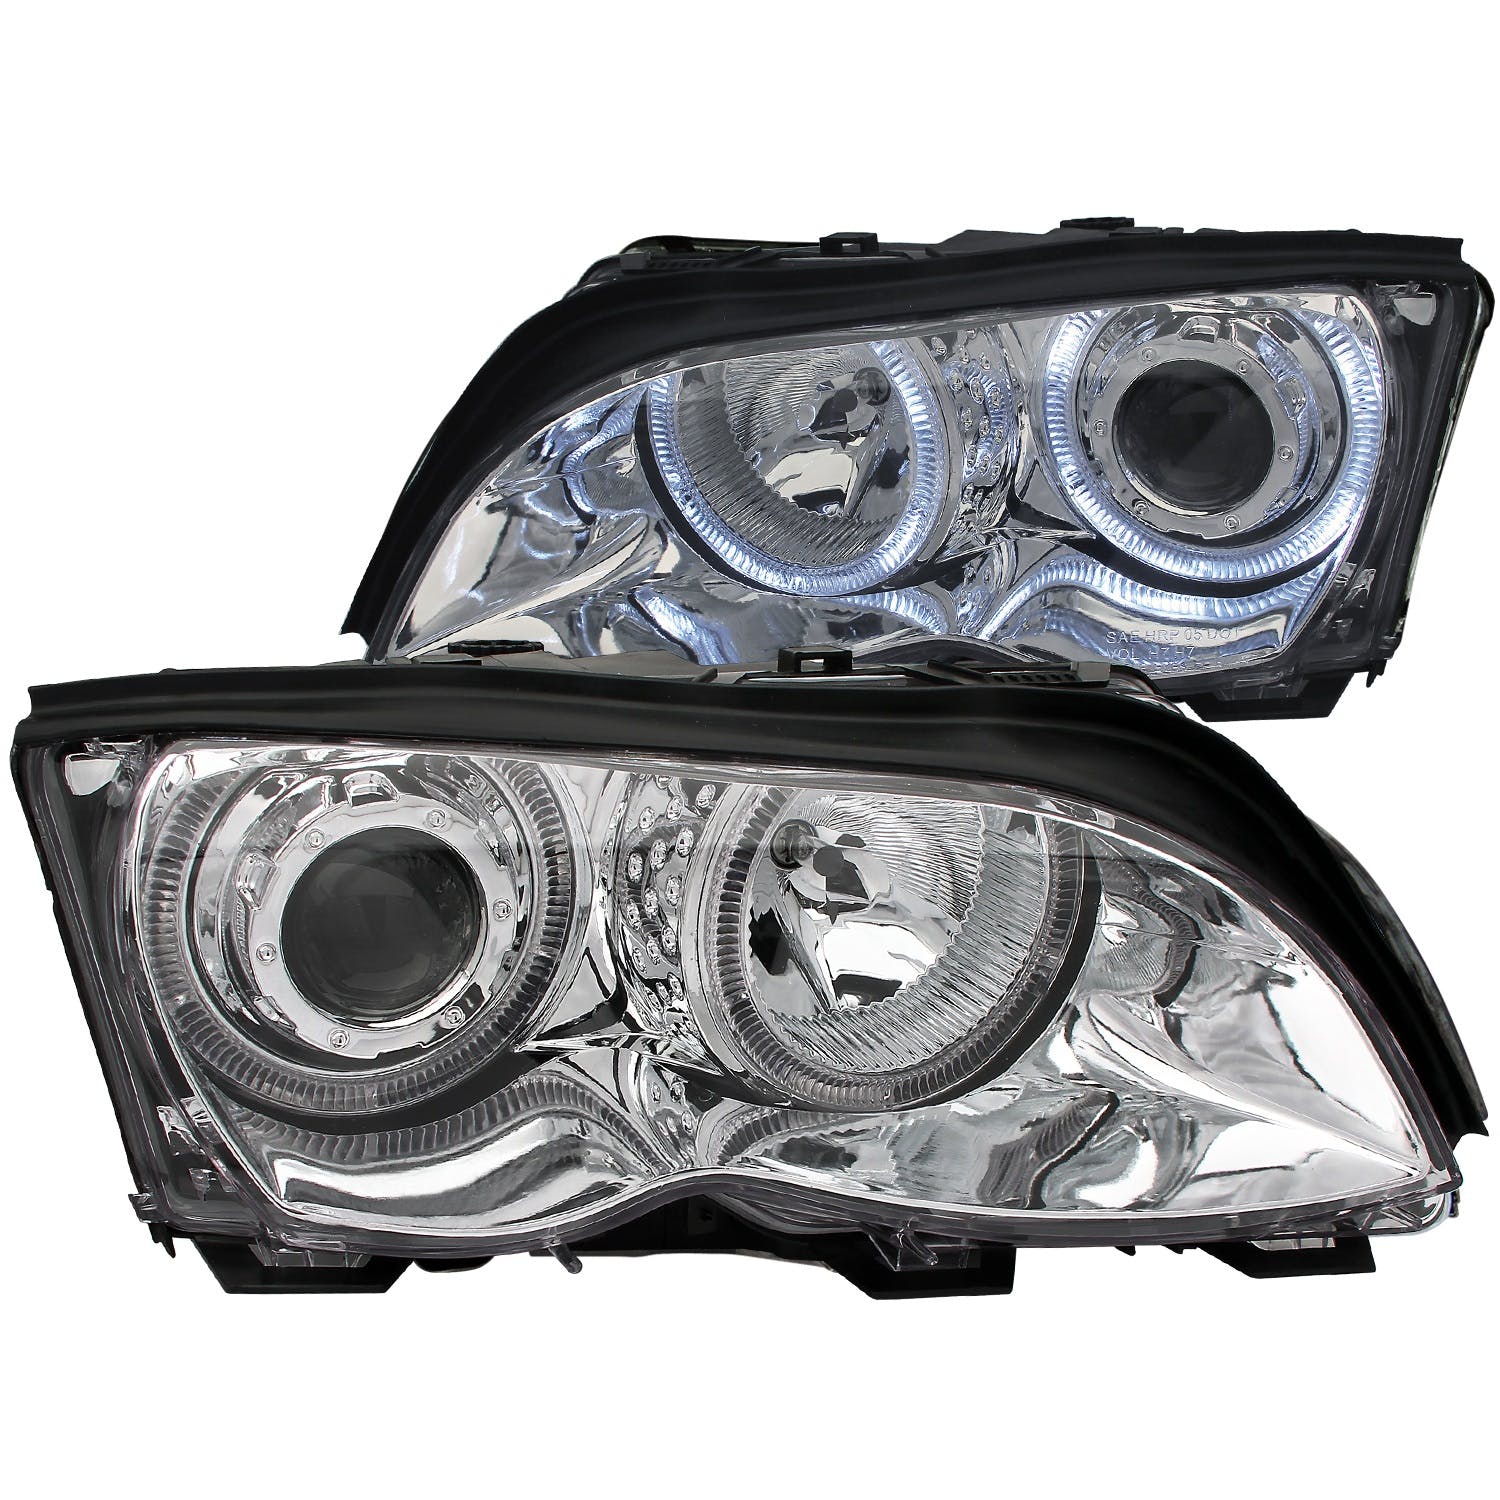 AnzoUSA 121212 Projector Headlights with Halo Chrome